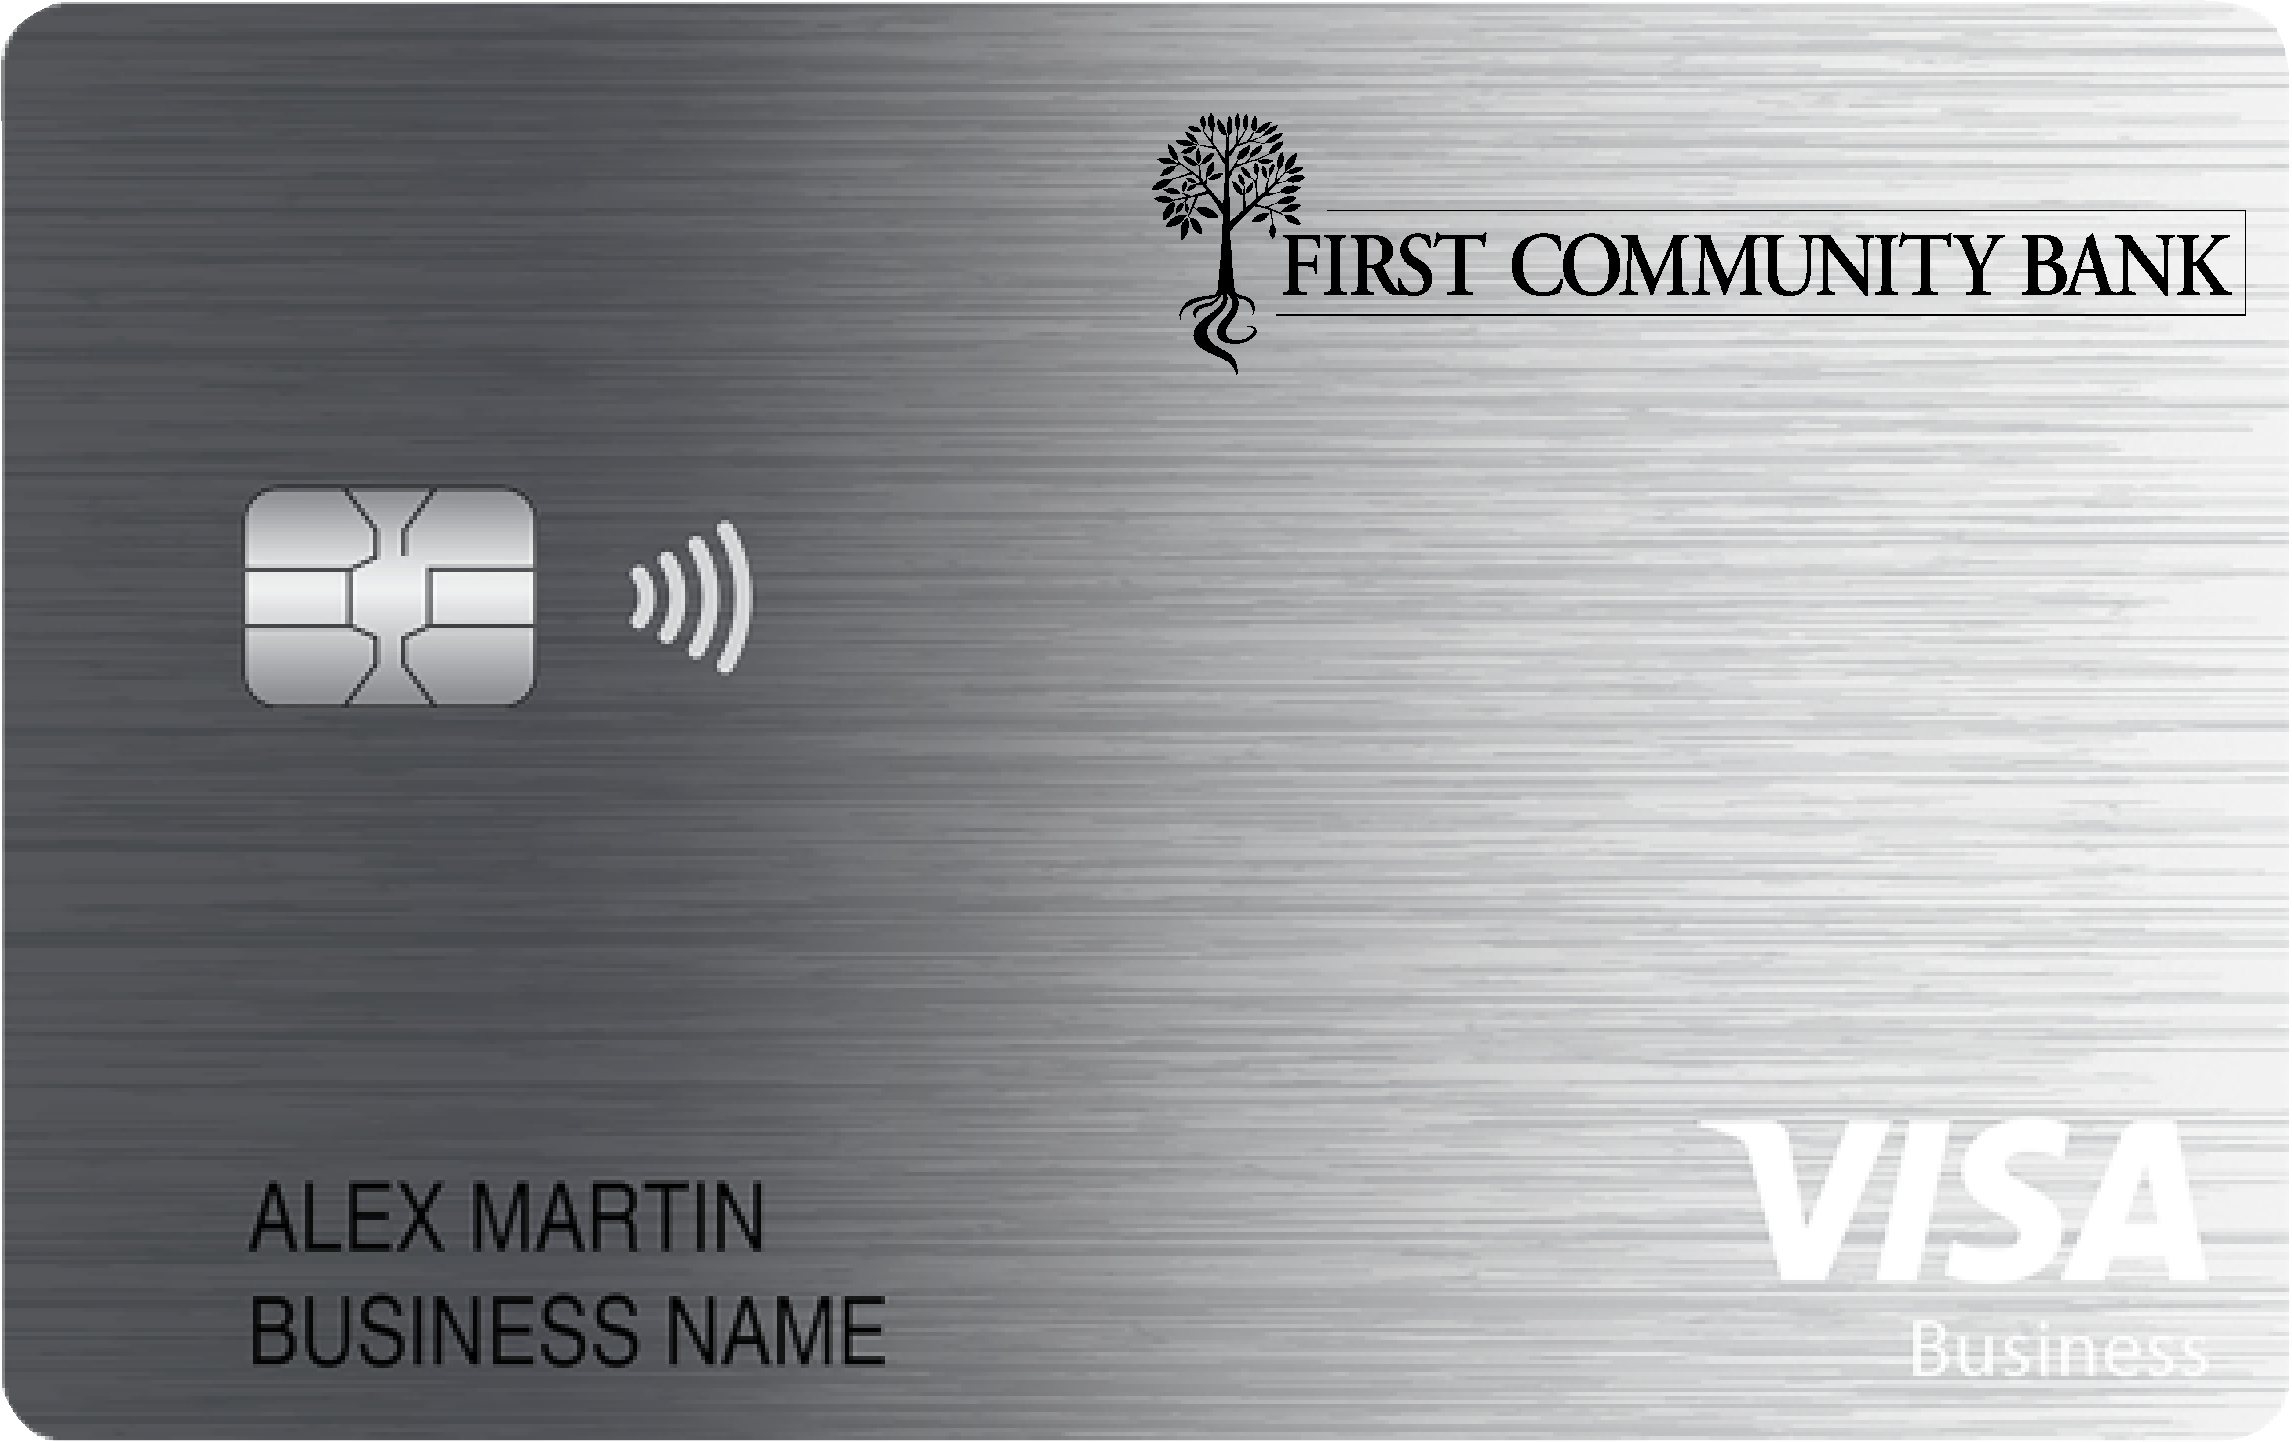 First Community Bank Business Card Card